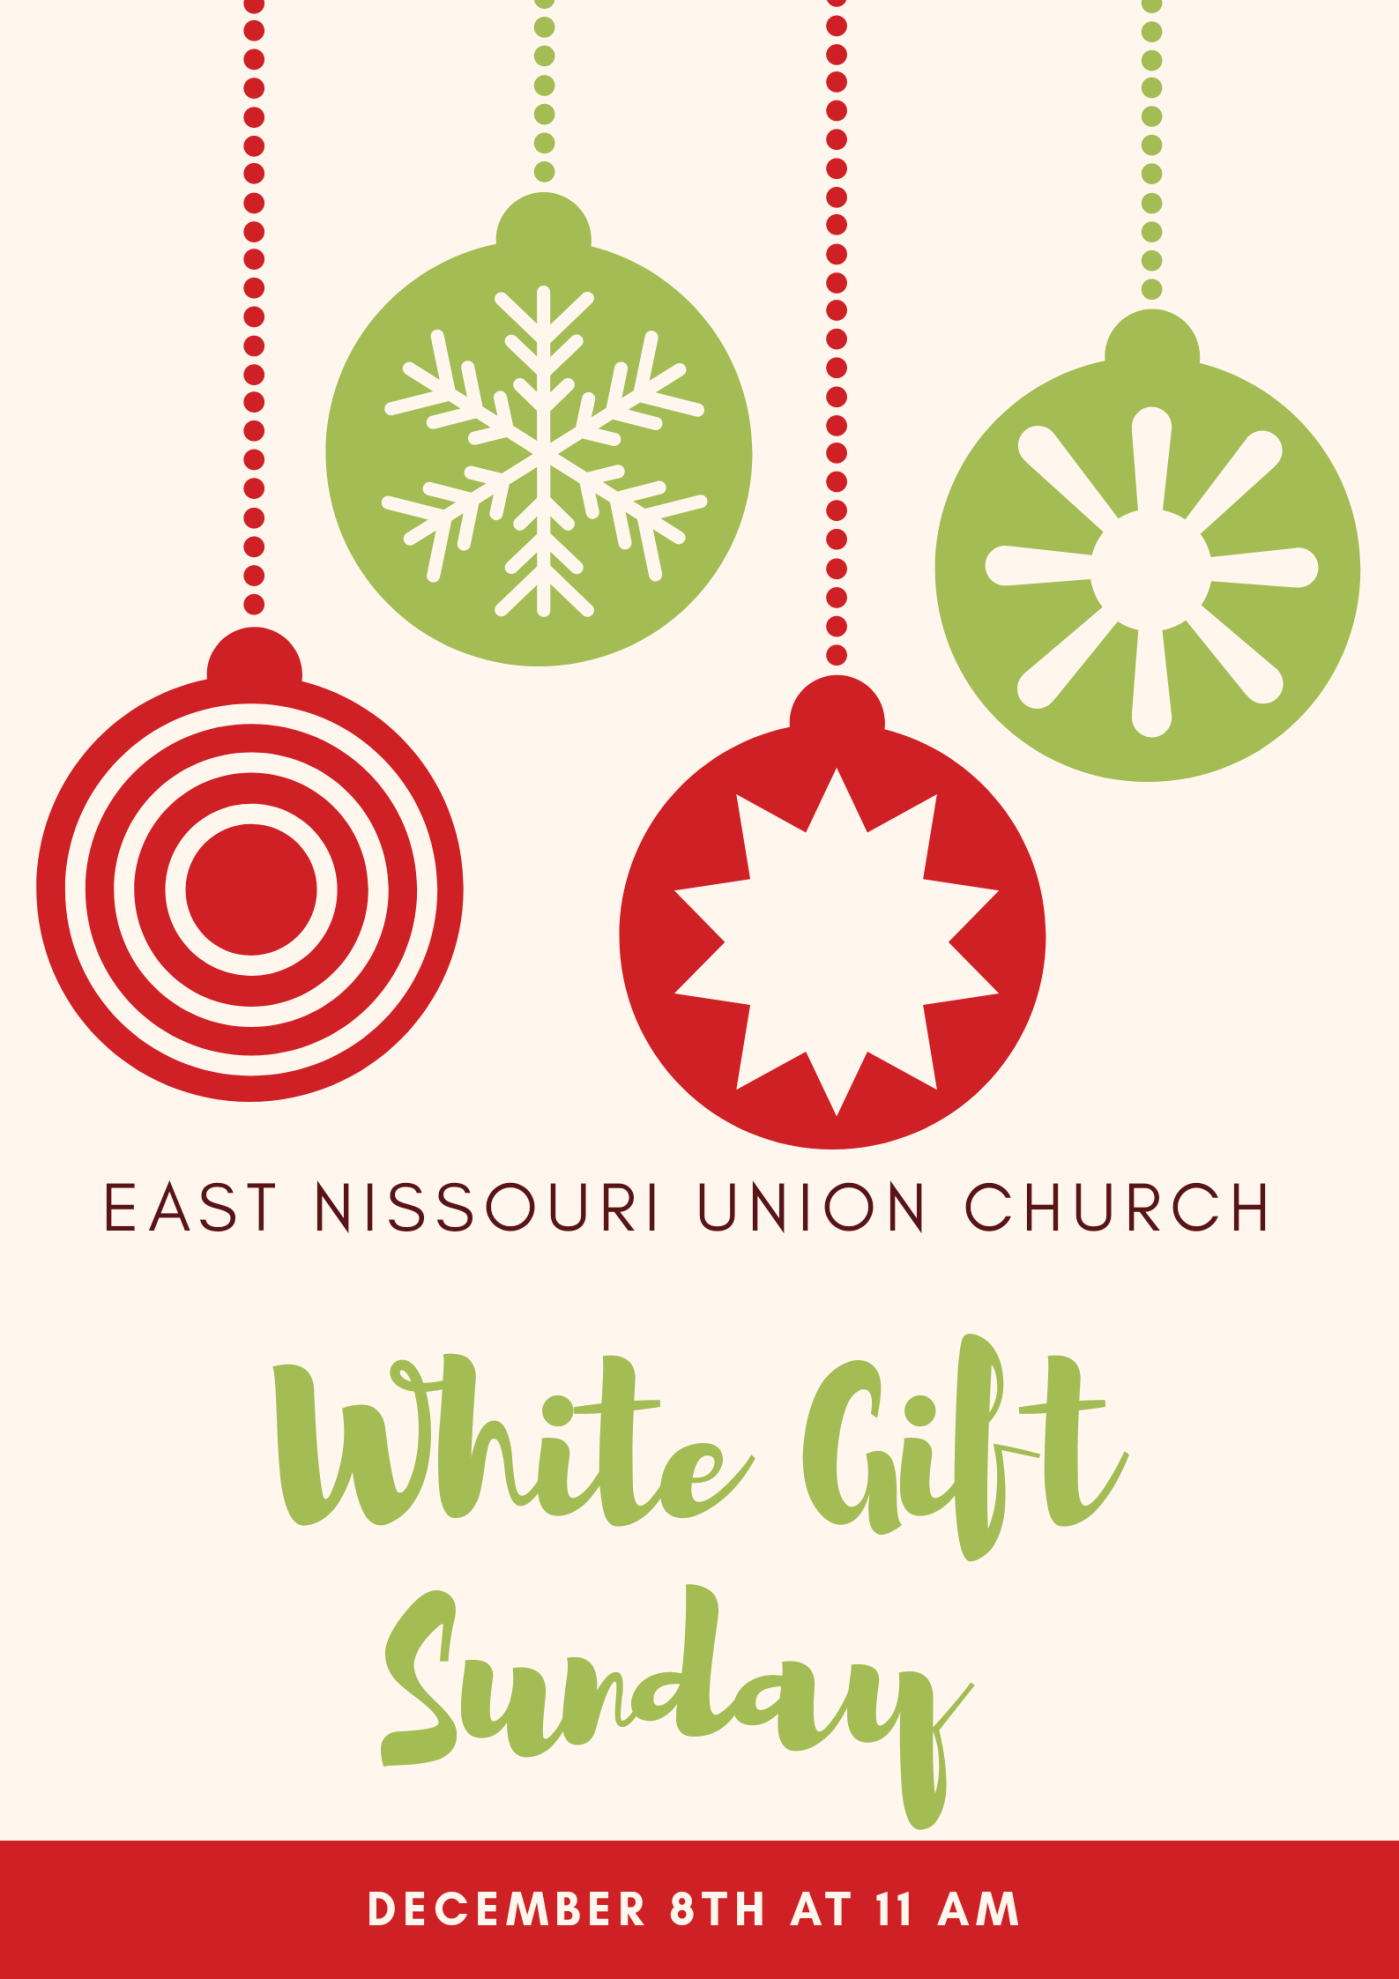 What is white gift sunday